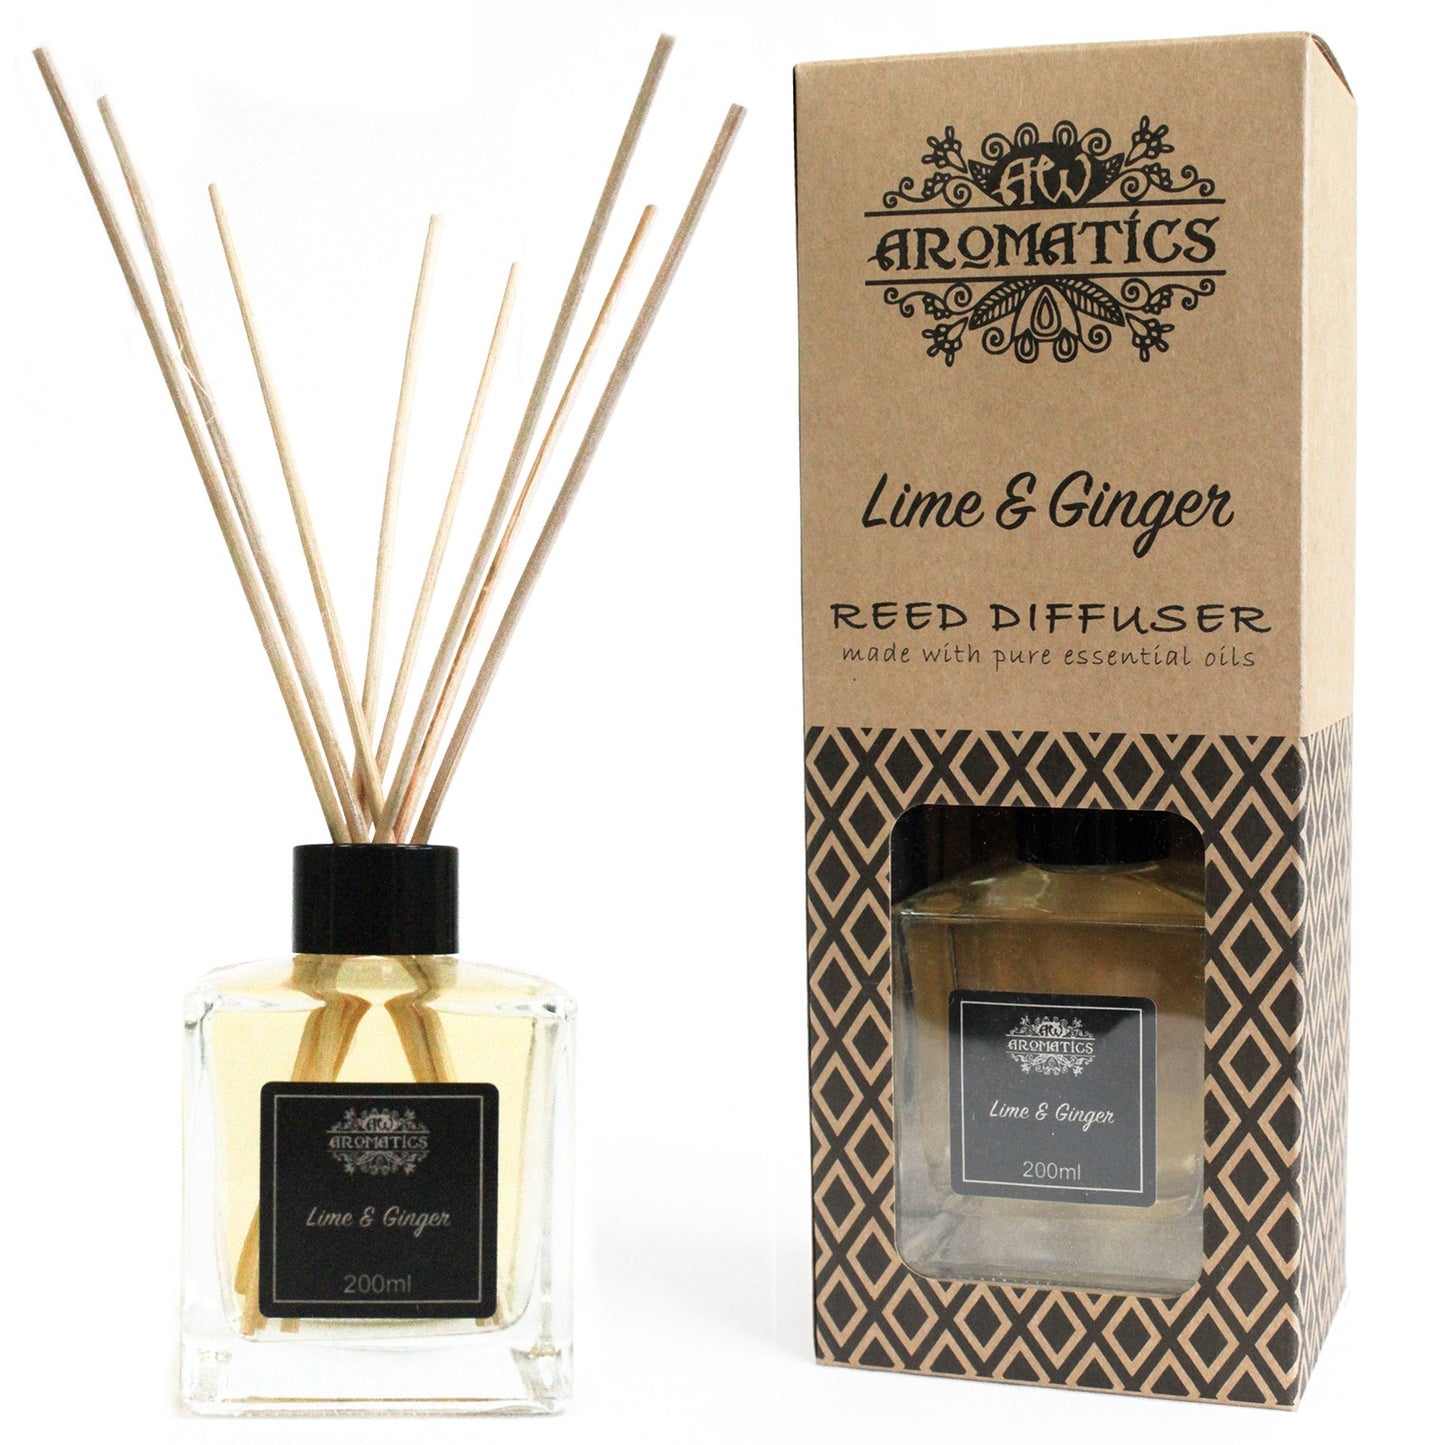 Lime & Ginger Essential Oil Reed Diffuser - 200ml